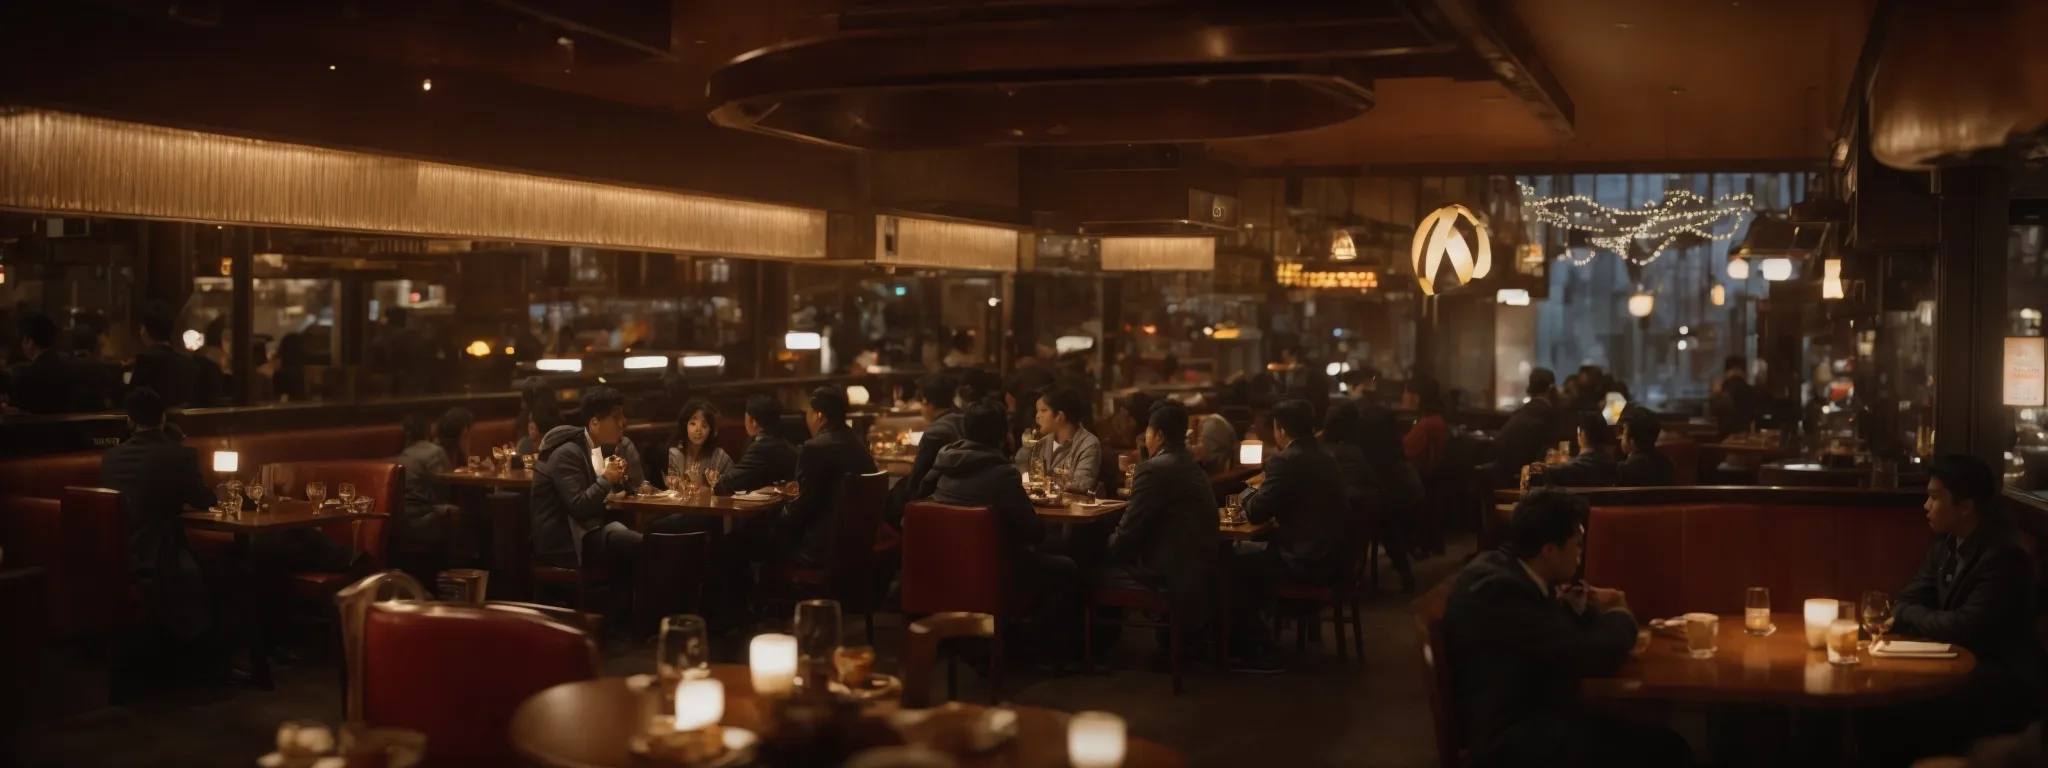 a bustling restaurant scene with patrons dining and a visible wi-fi symbol glowing overhead.